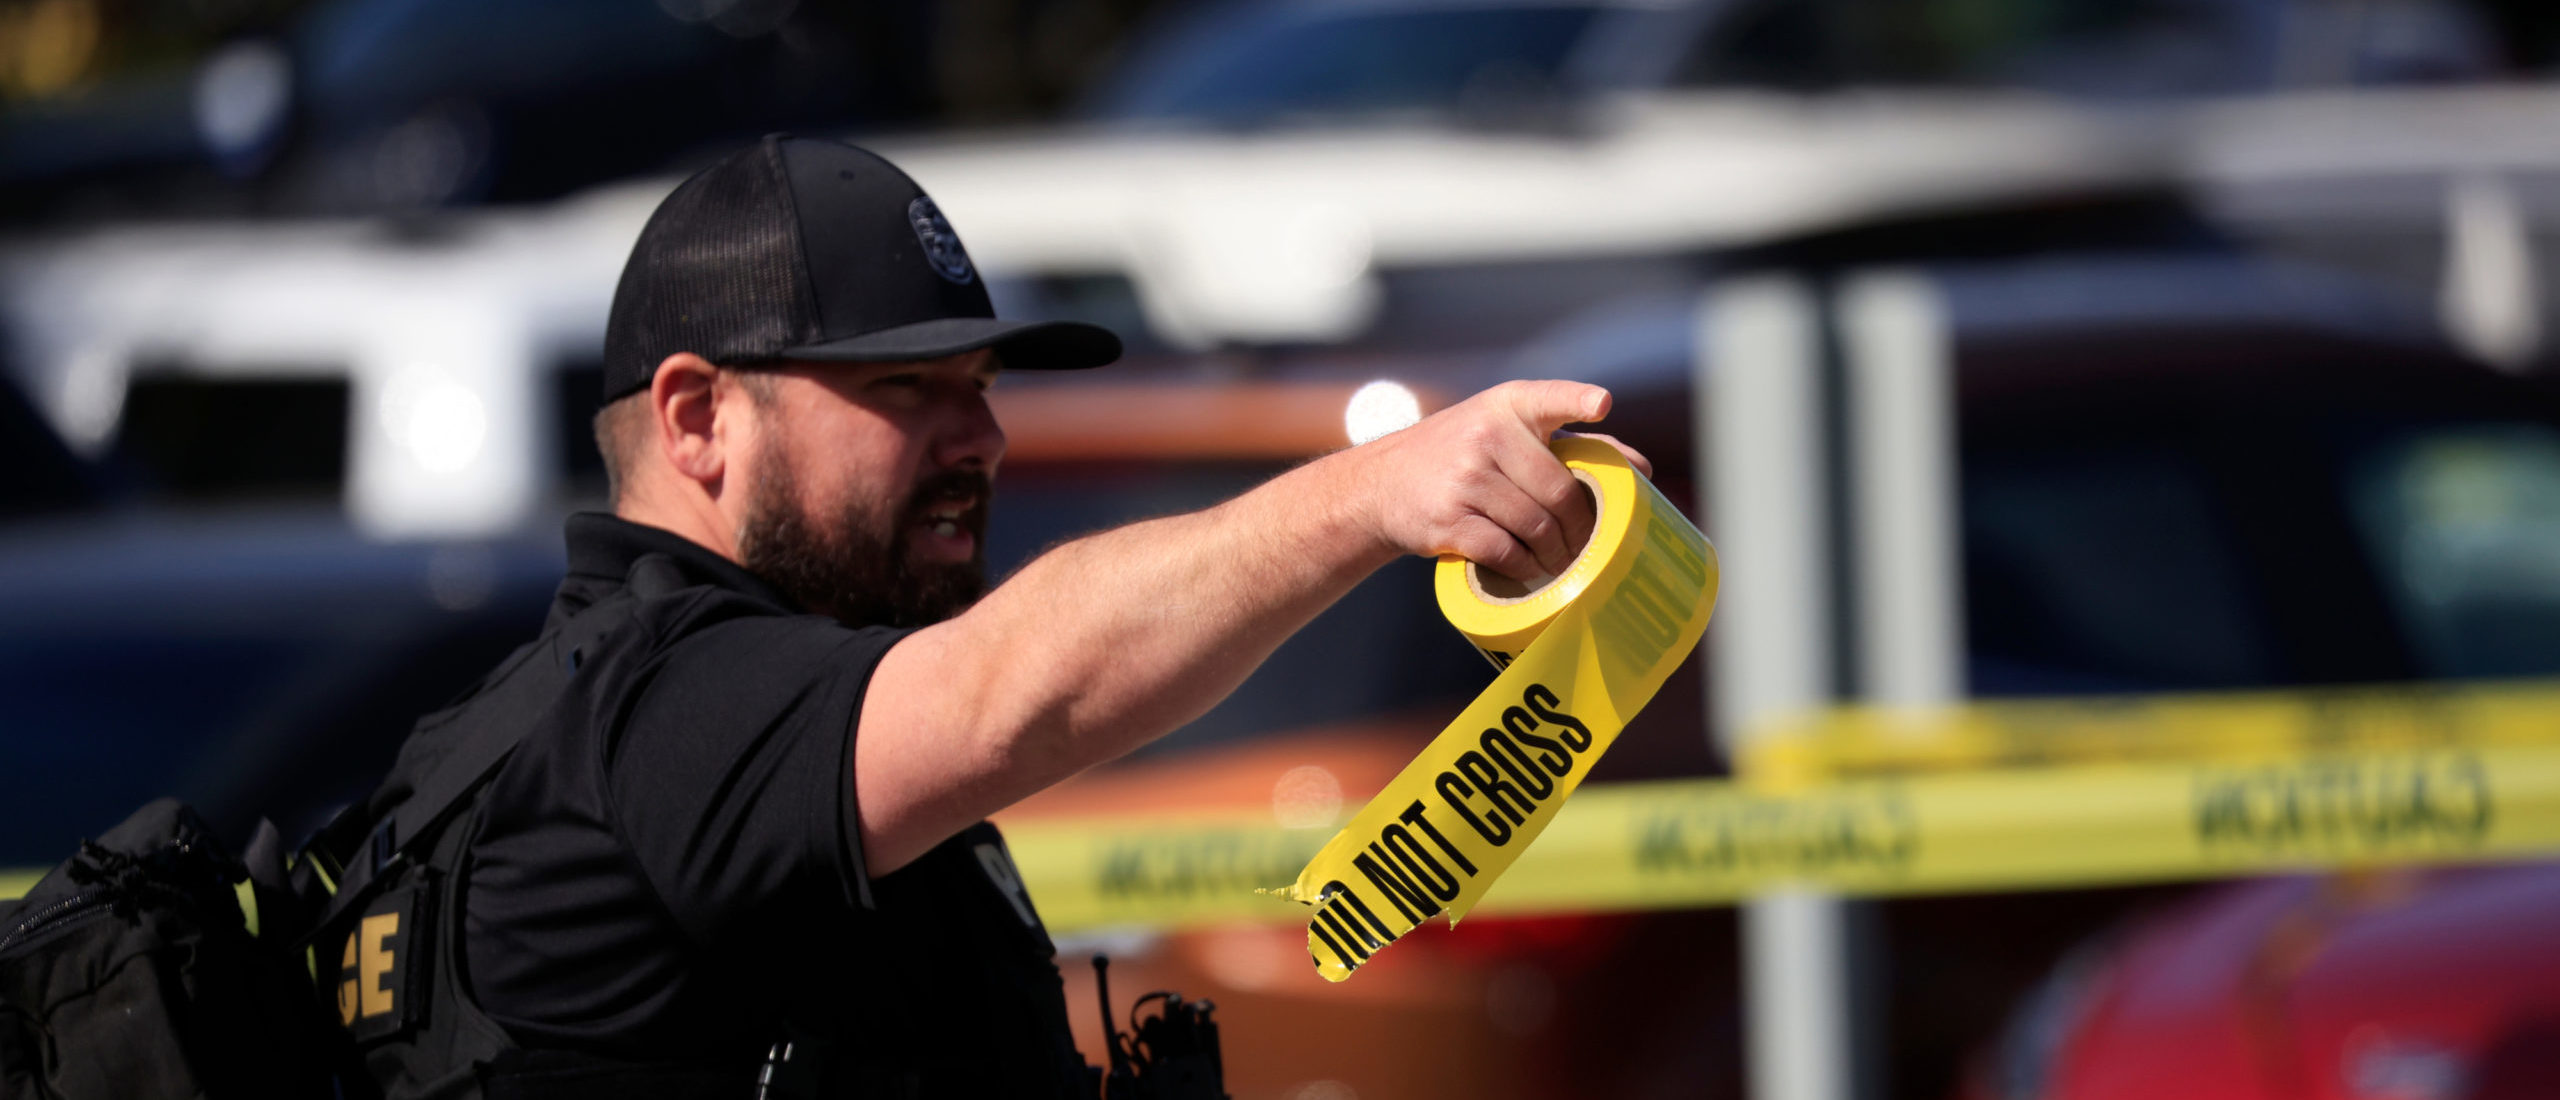 LOUISVILLE, KY - APRIL 10: A law enforcement officer carries a roll of crime scene tape after a gunman opened fire at the Old National Bank building on April 10, 2023 in Louisville, Kentucky. According to reports, there are multiple fatalities and injuries. The shooter died at the scene.